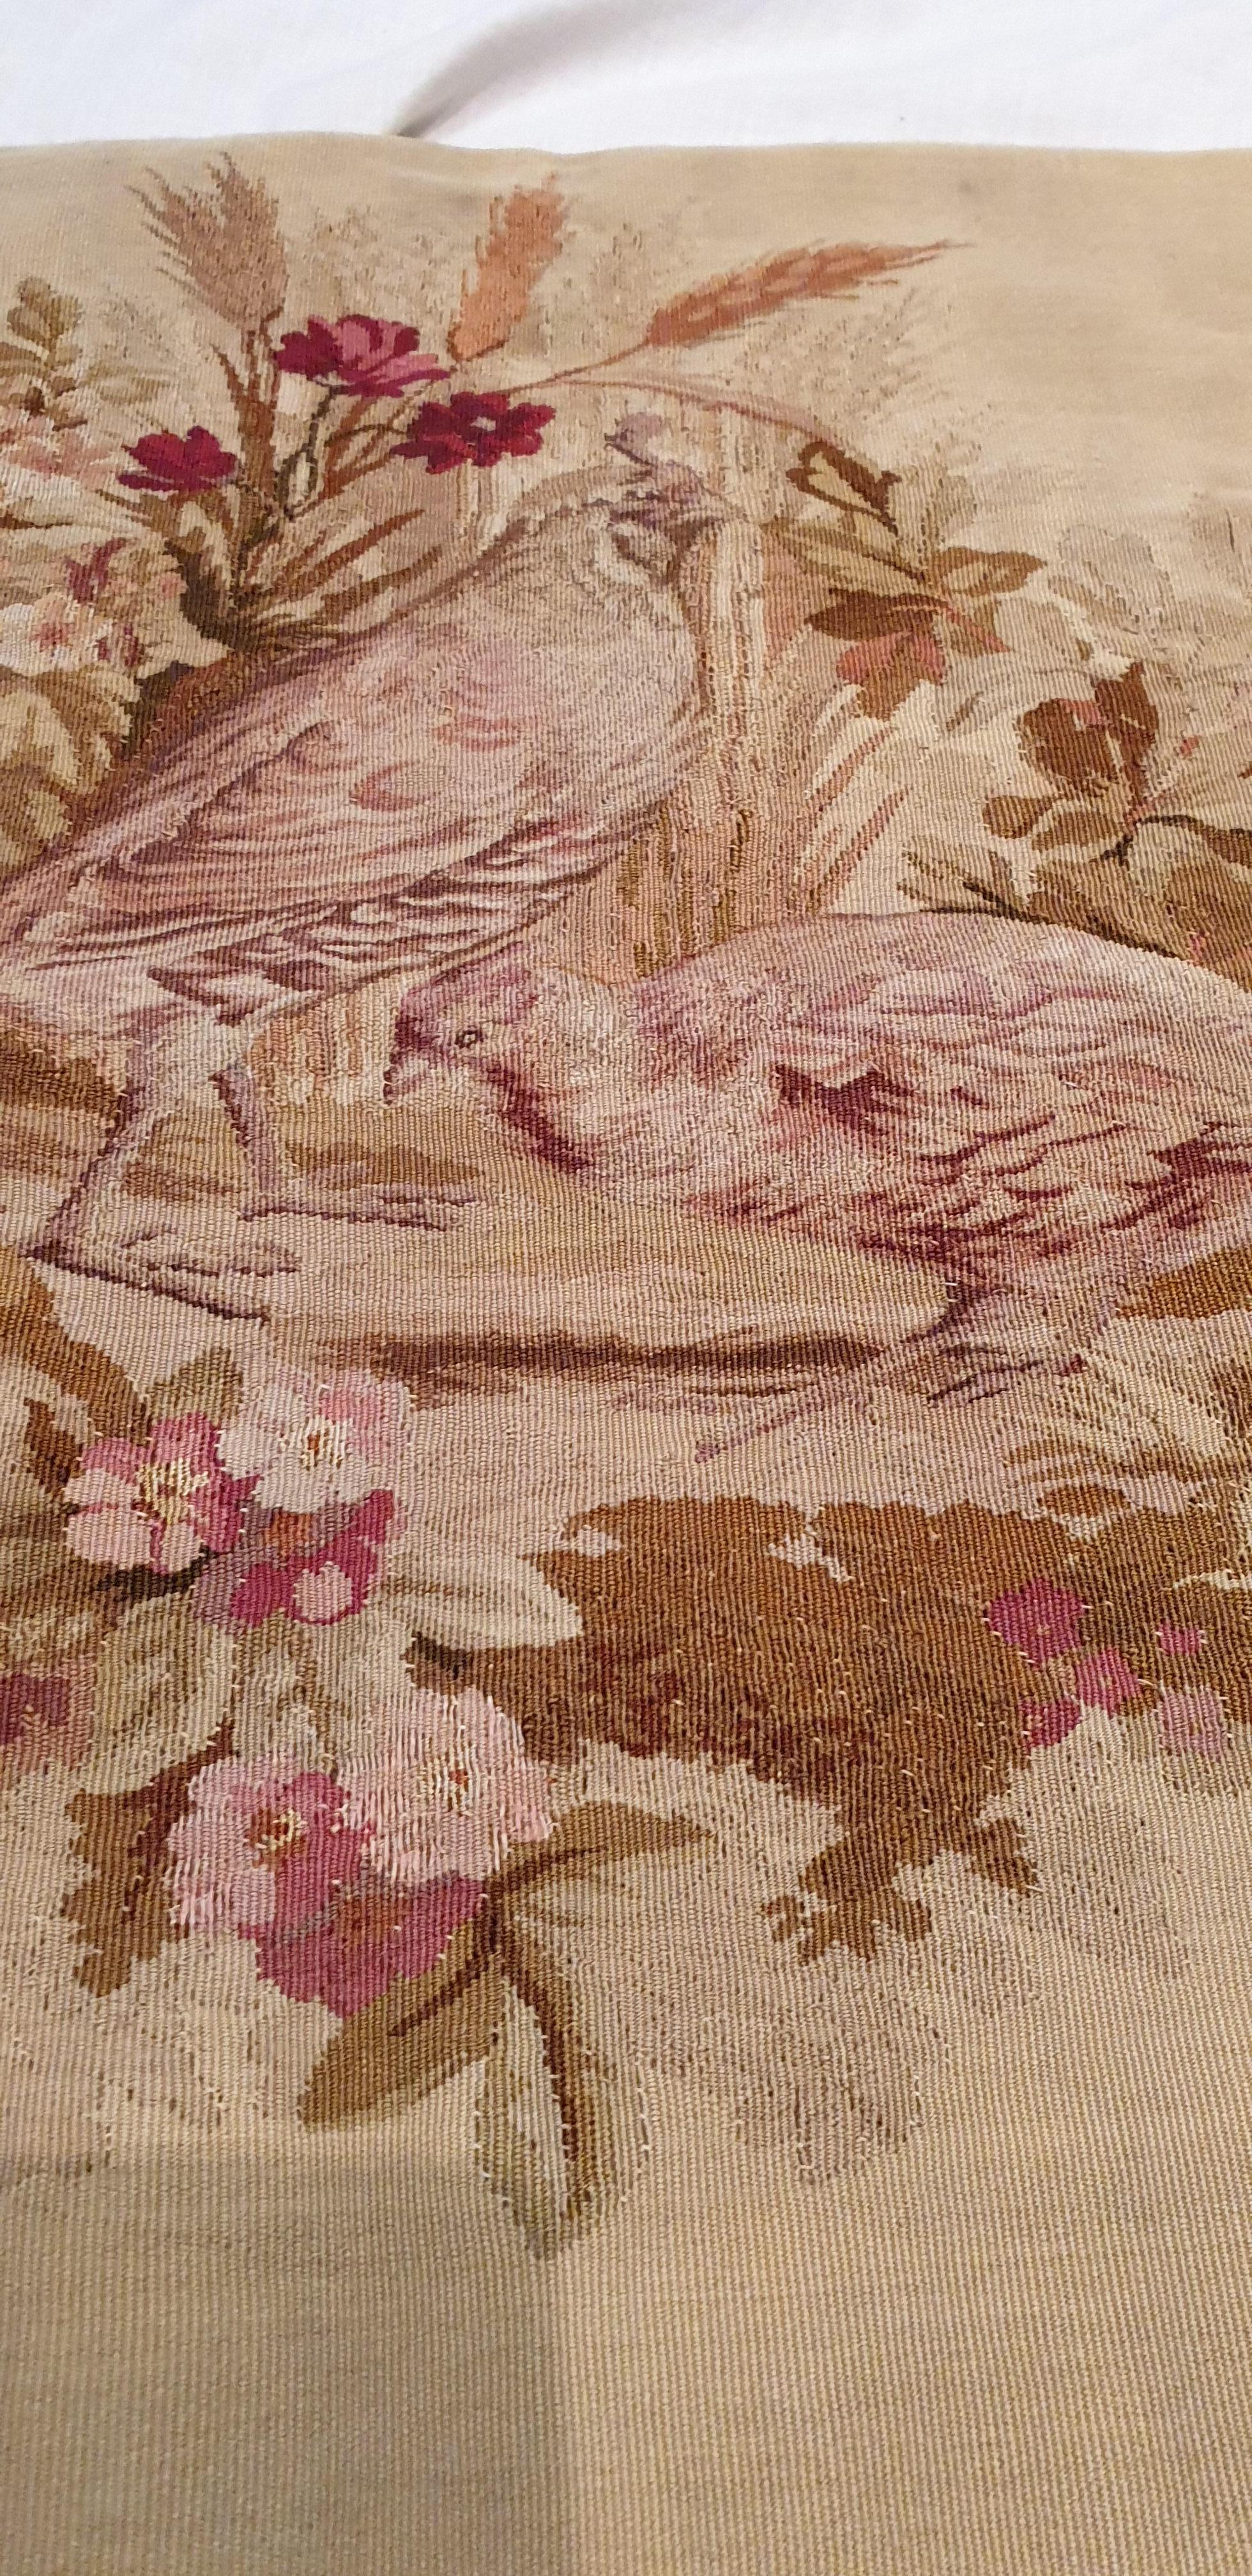 Hand-Woven 705 - 19th Century Aubusson Tapestry